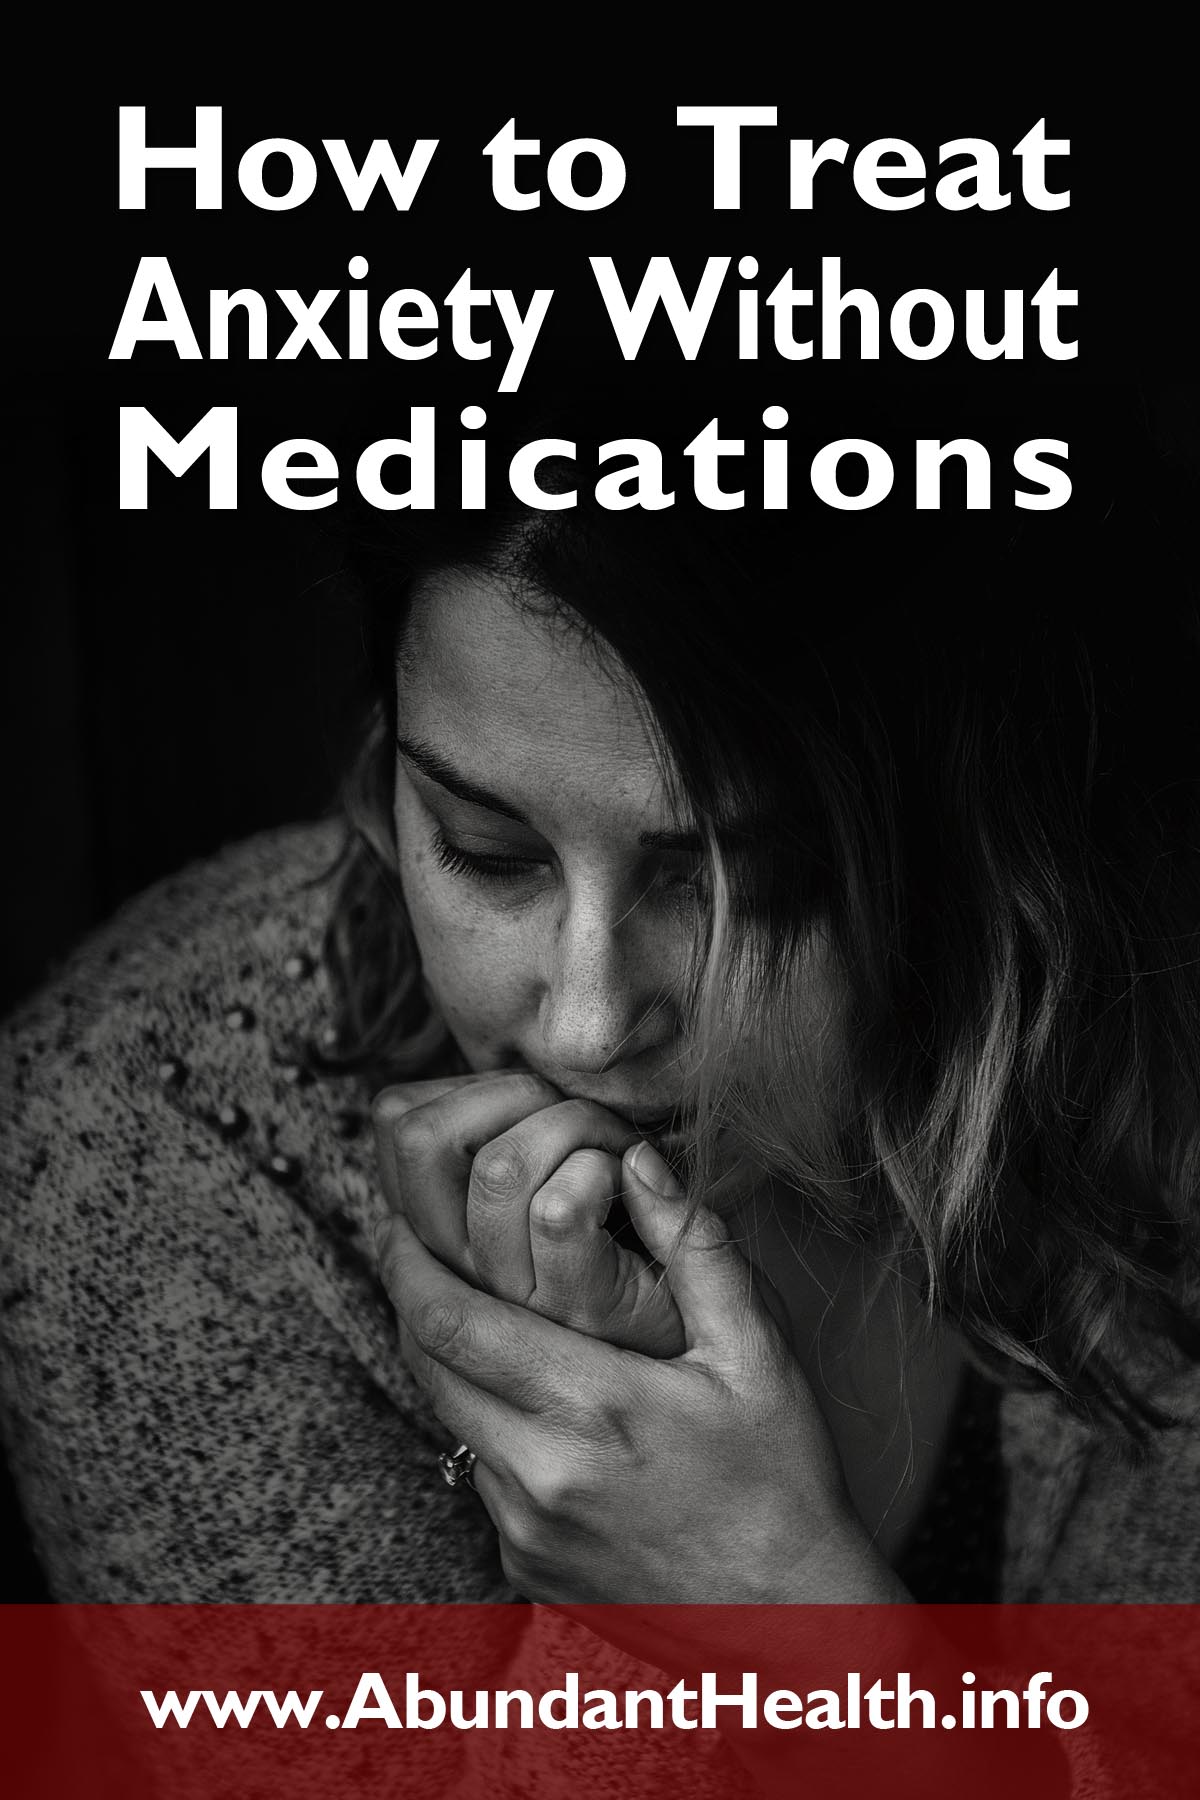 How to Treat Anxiety Without Medications